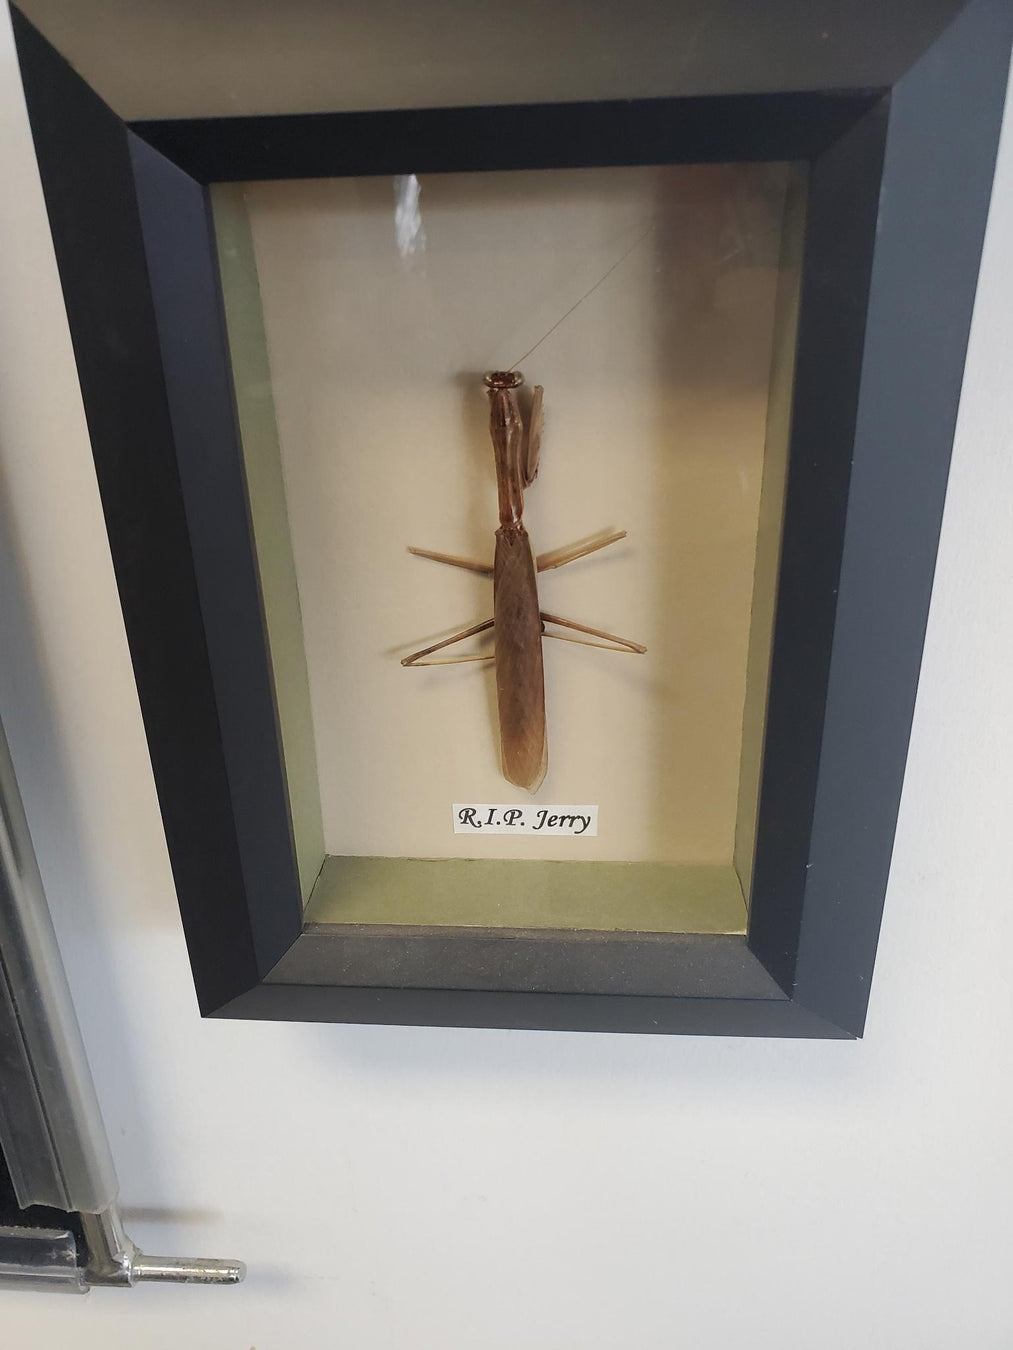 Yes, you can even frame bugs.  RIP Jerry.